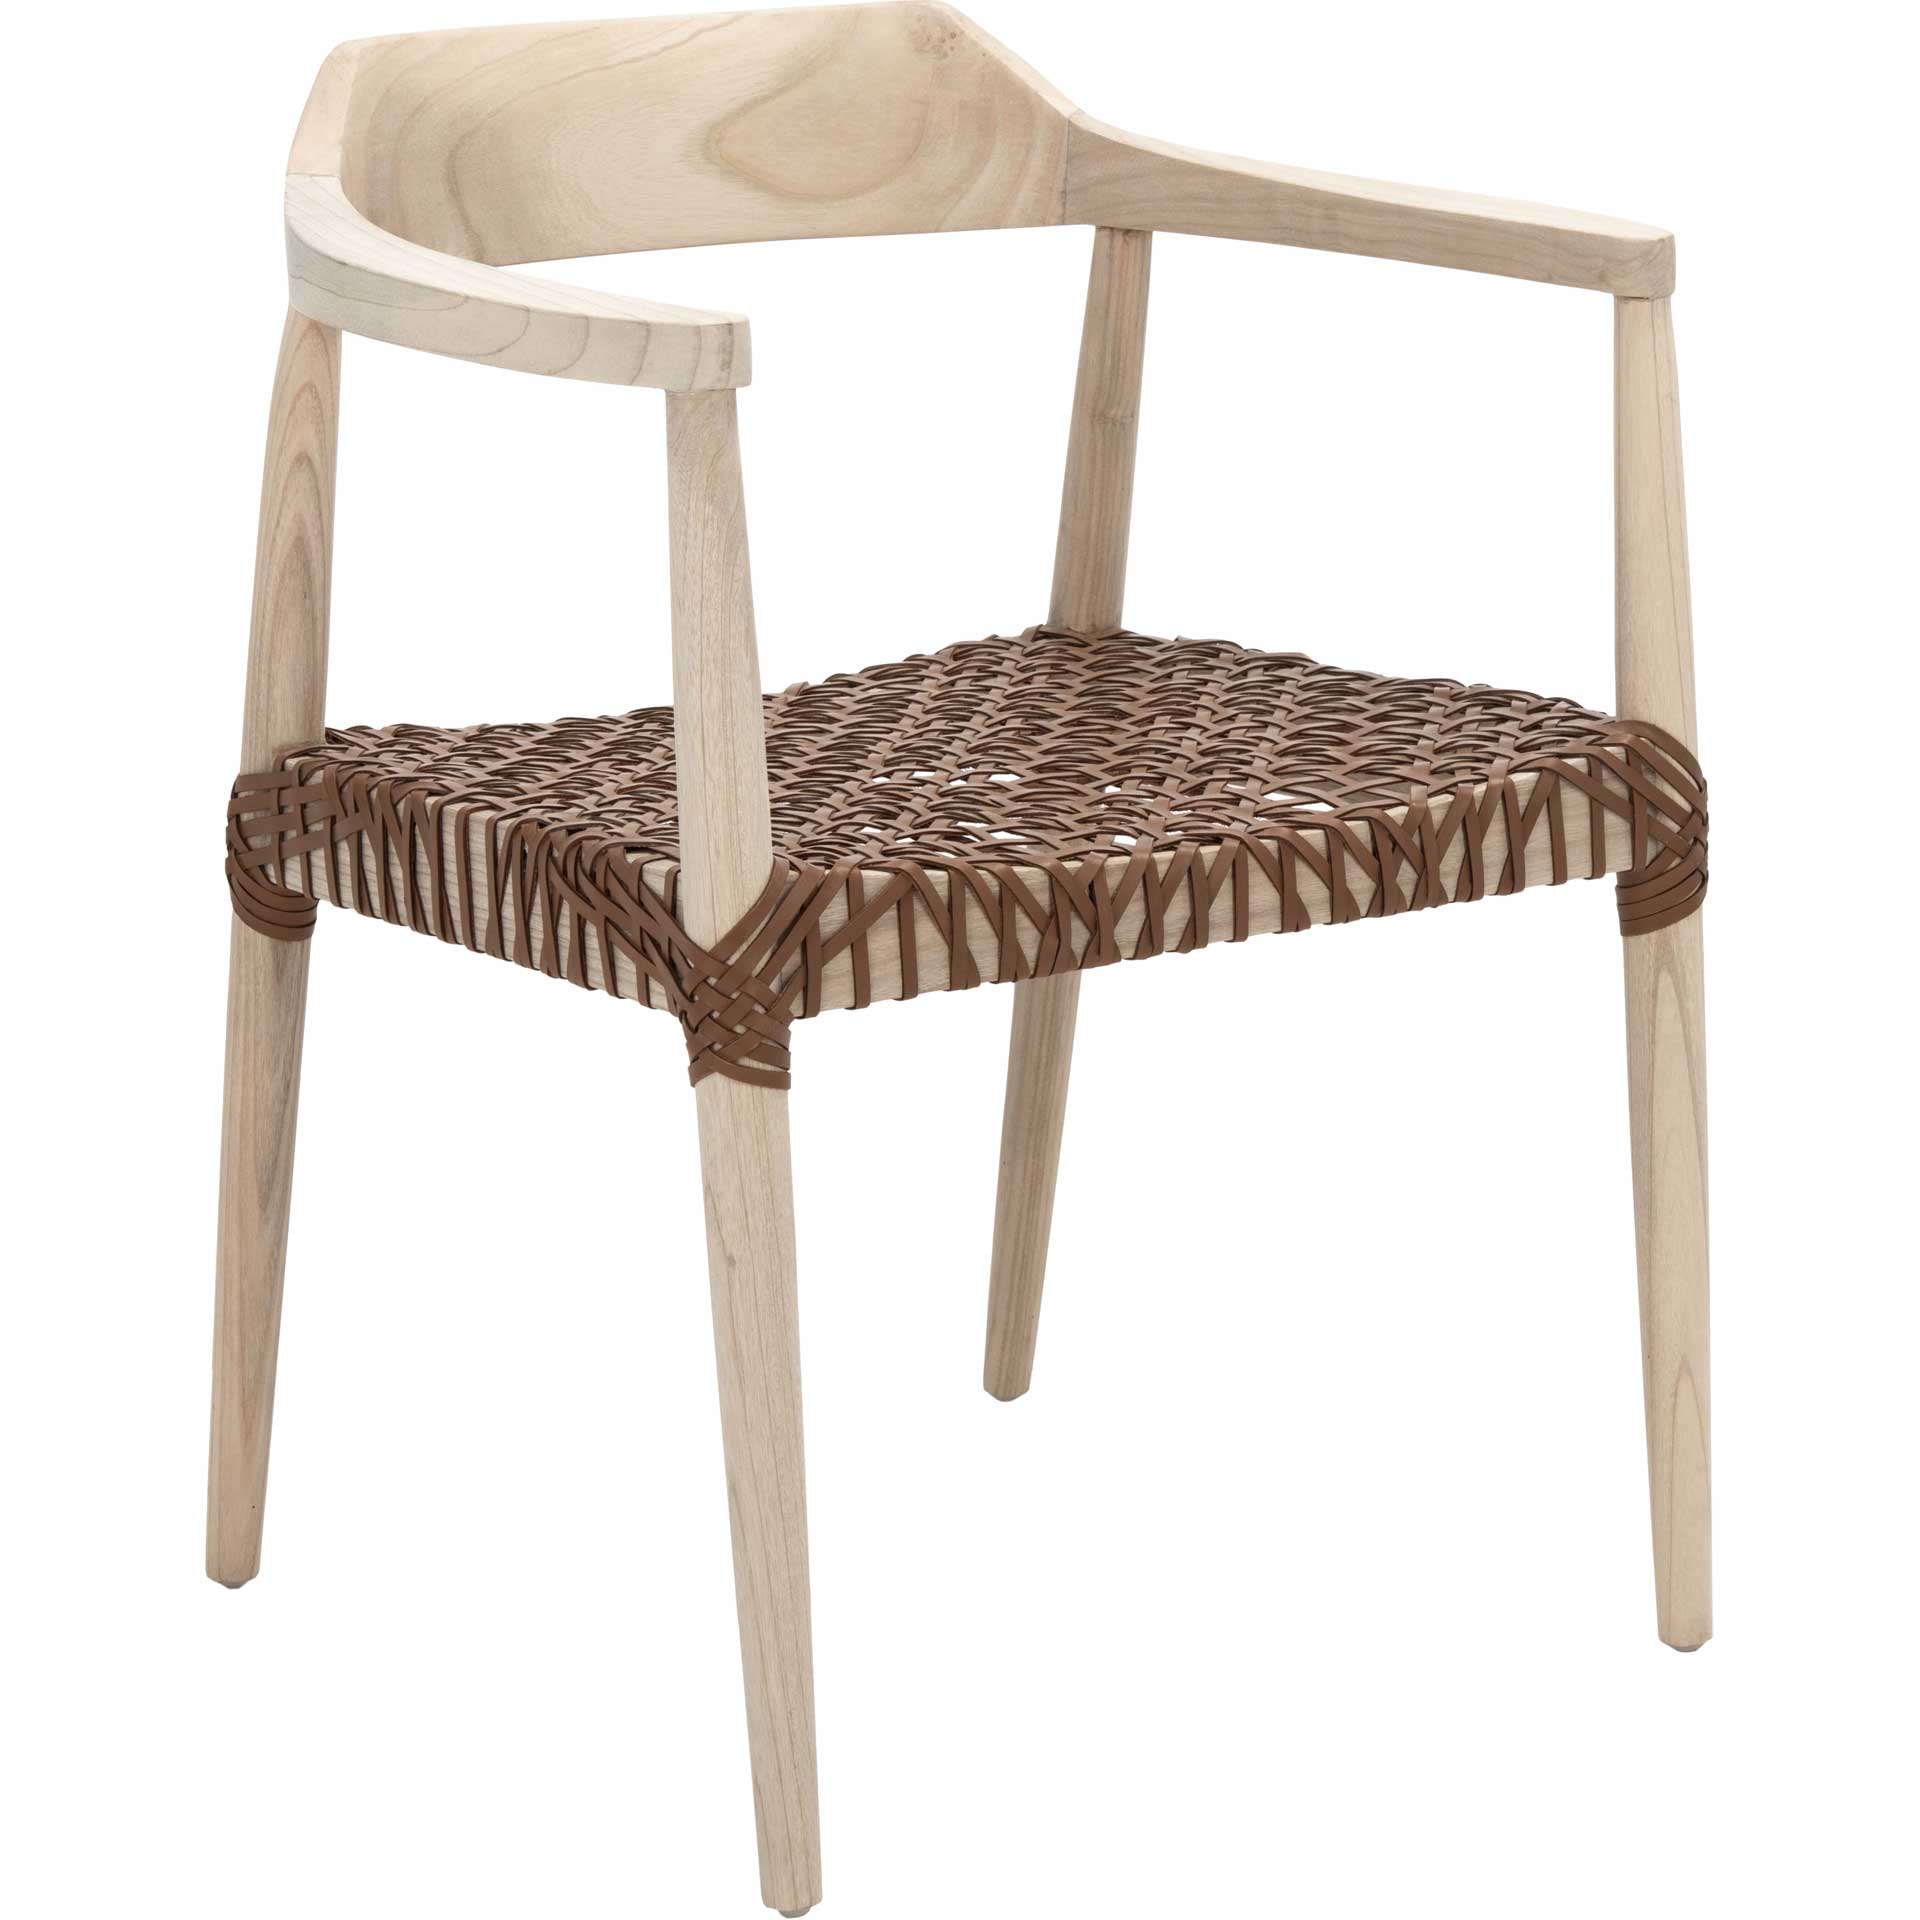 Murray Leather Woven Accent Chair Natural